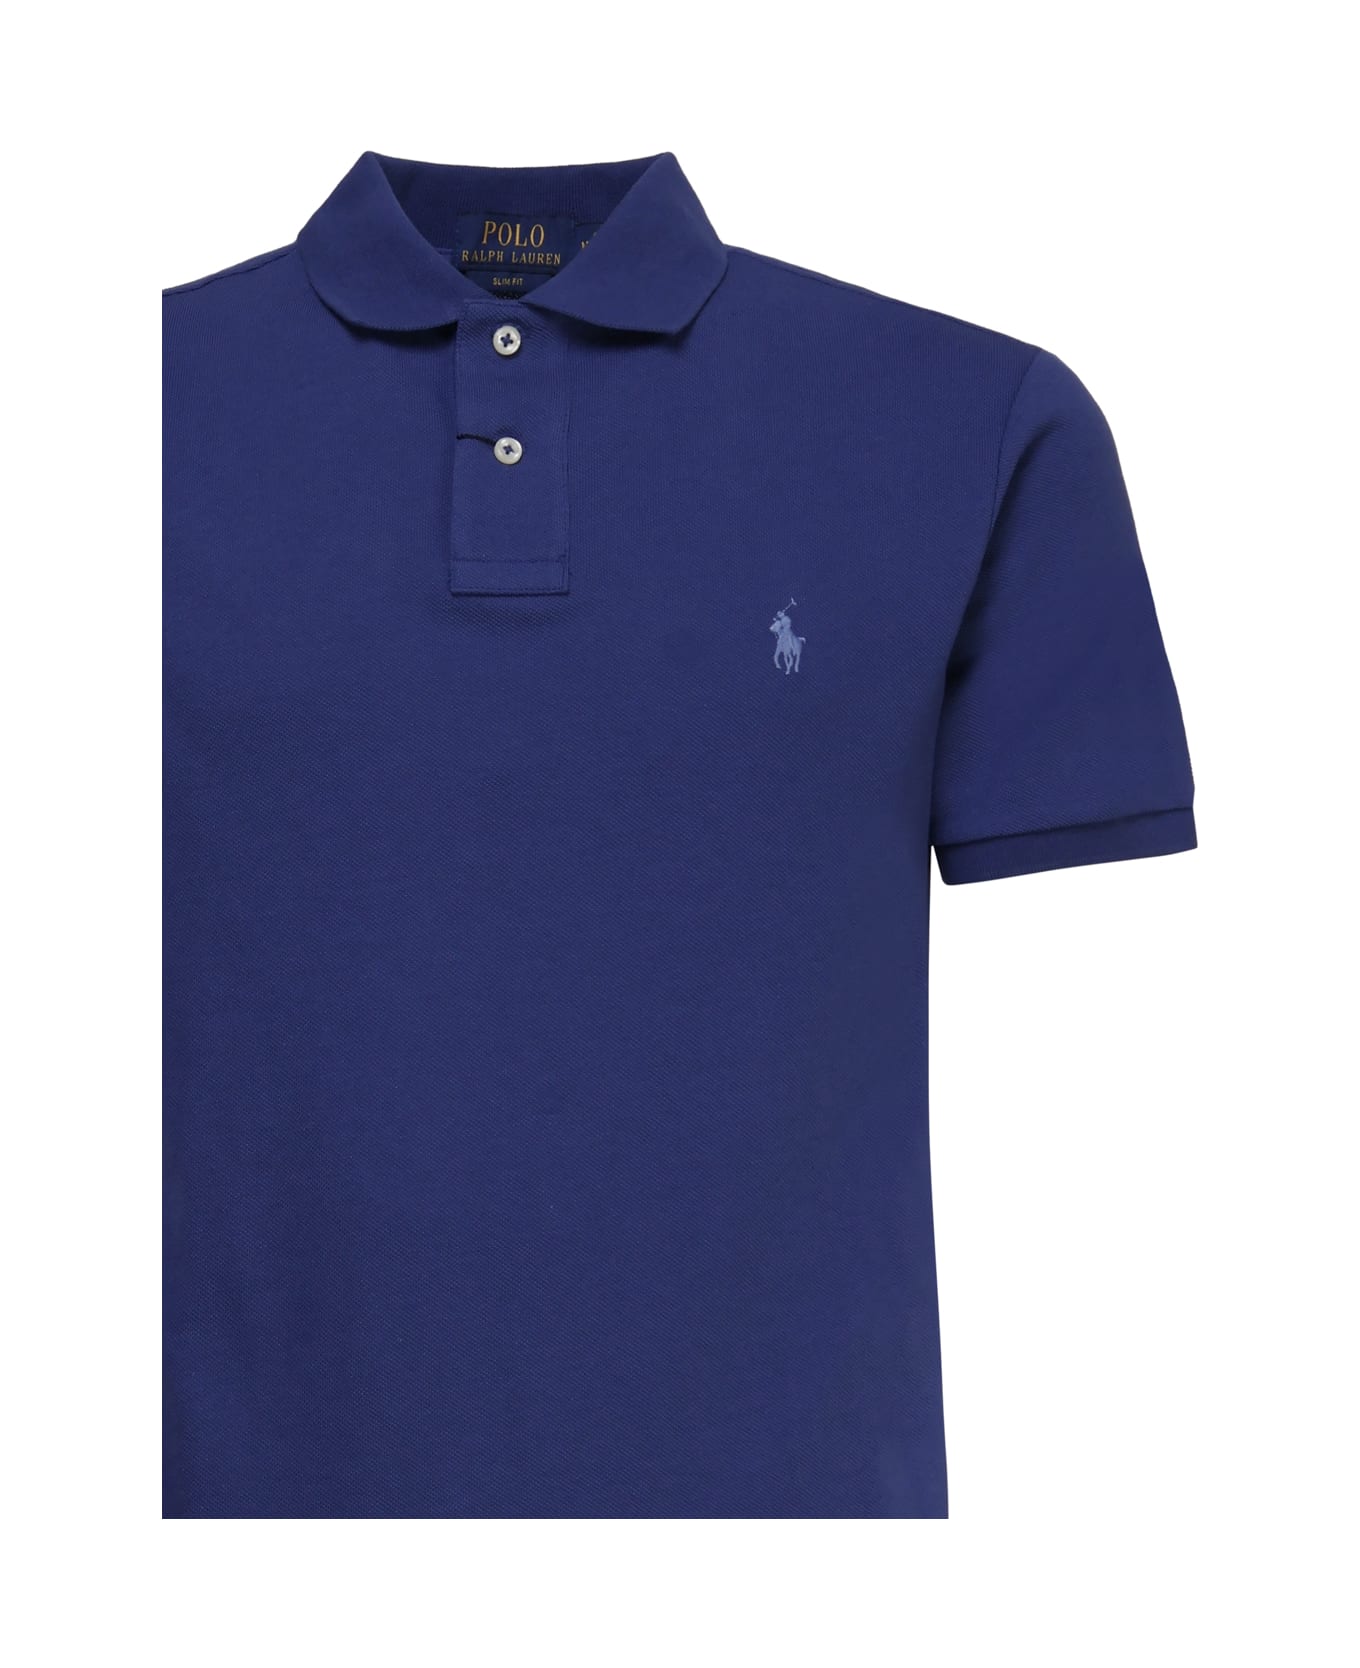 Polo Ralph Lauren Polo Shirt With Embroidery Polo Shirt - BLUE ポロシャツ